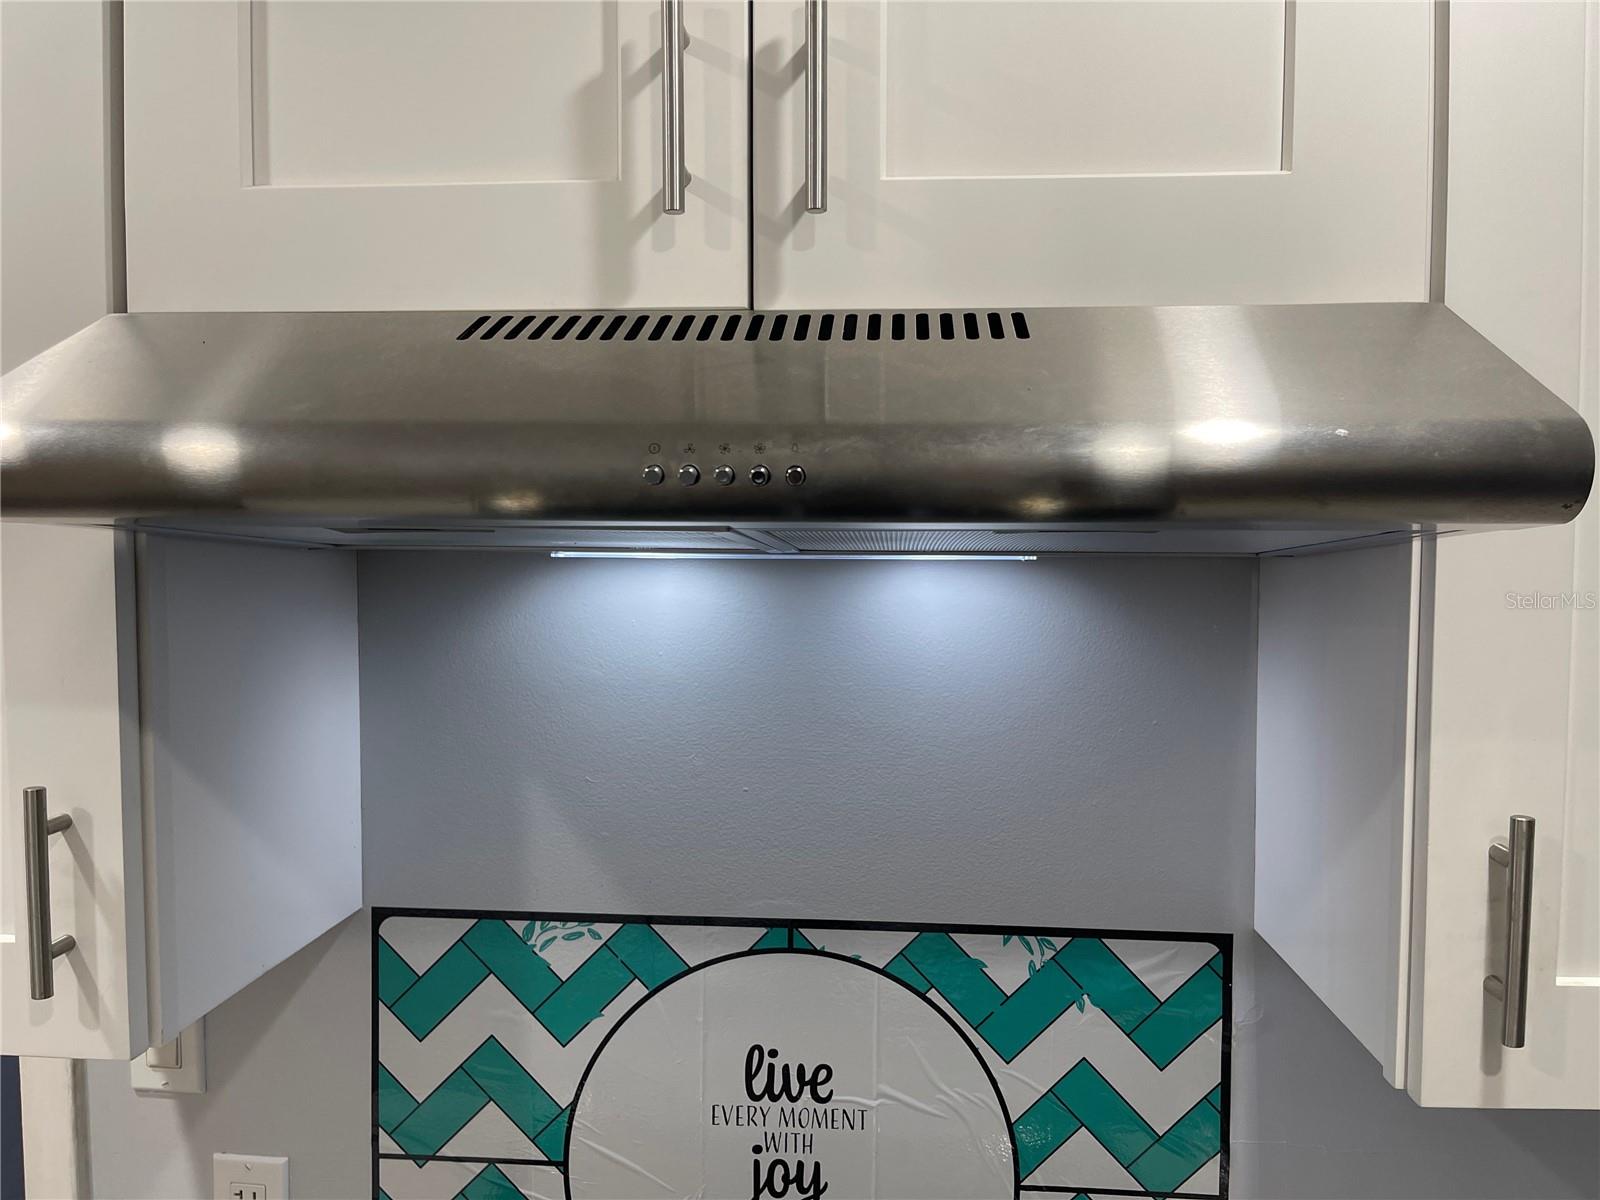 Stainless hood over the stove!